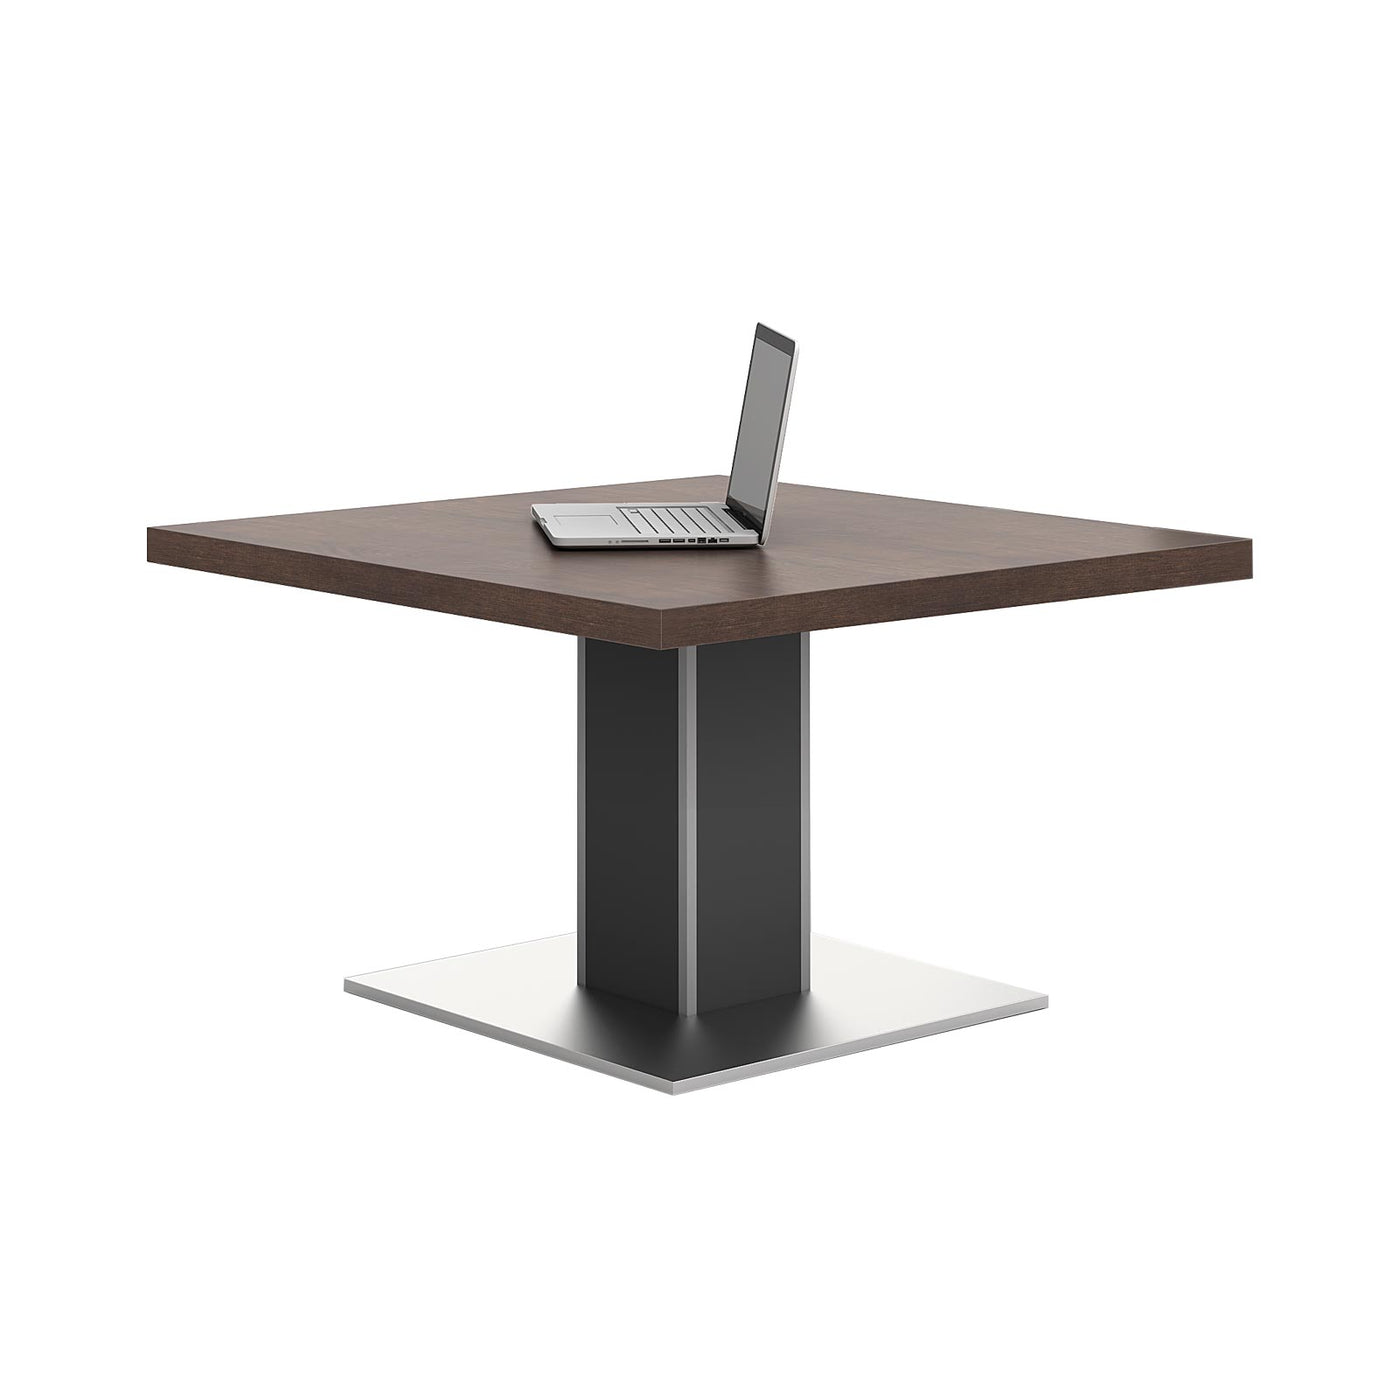 Square Meeting Tables MP-351